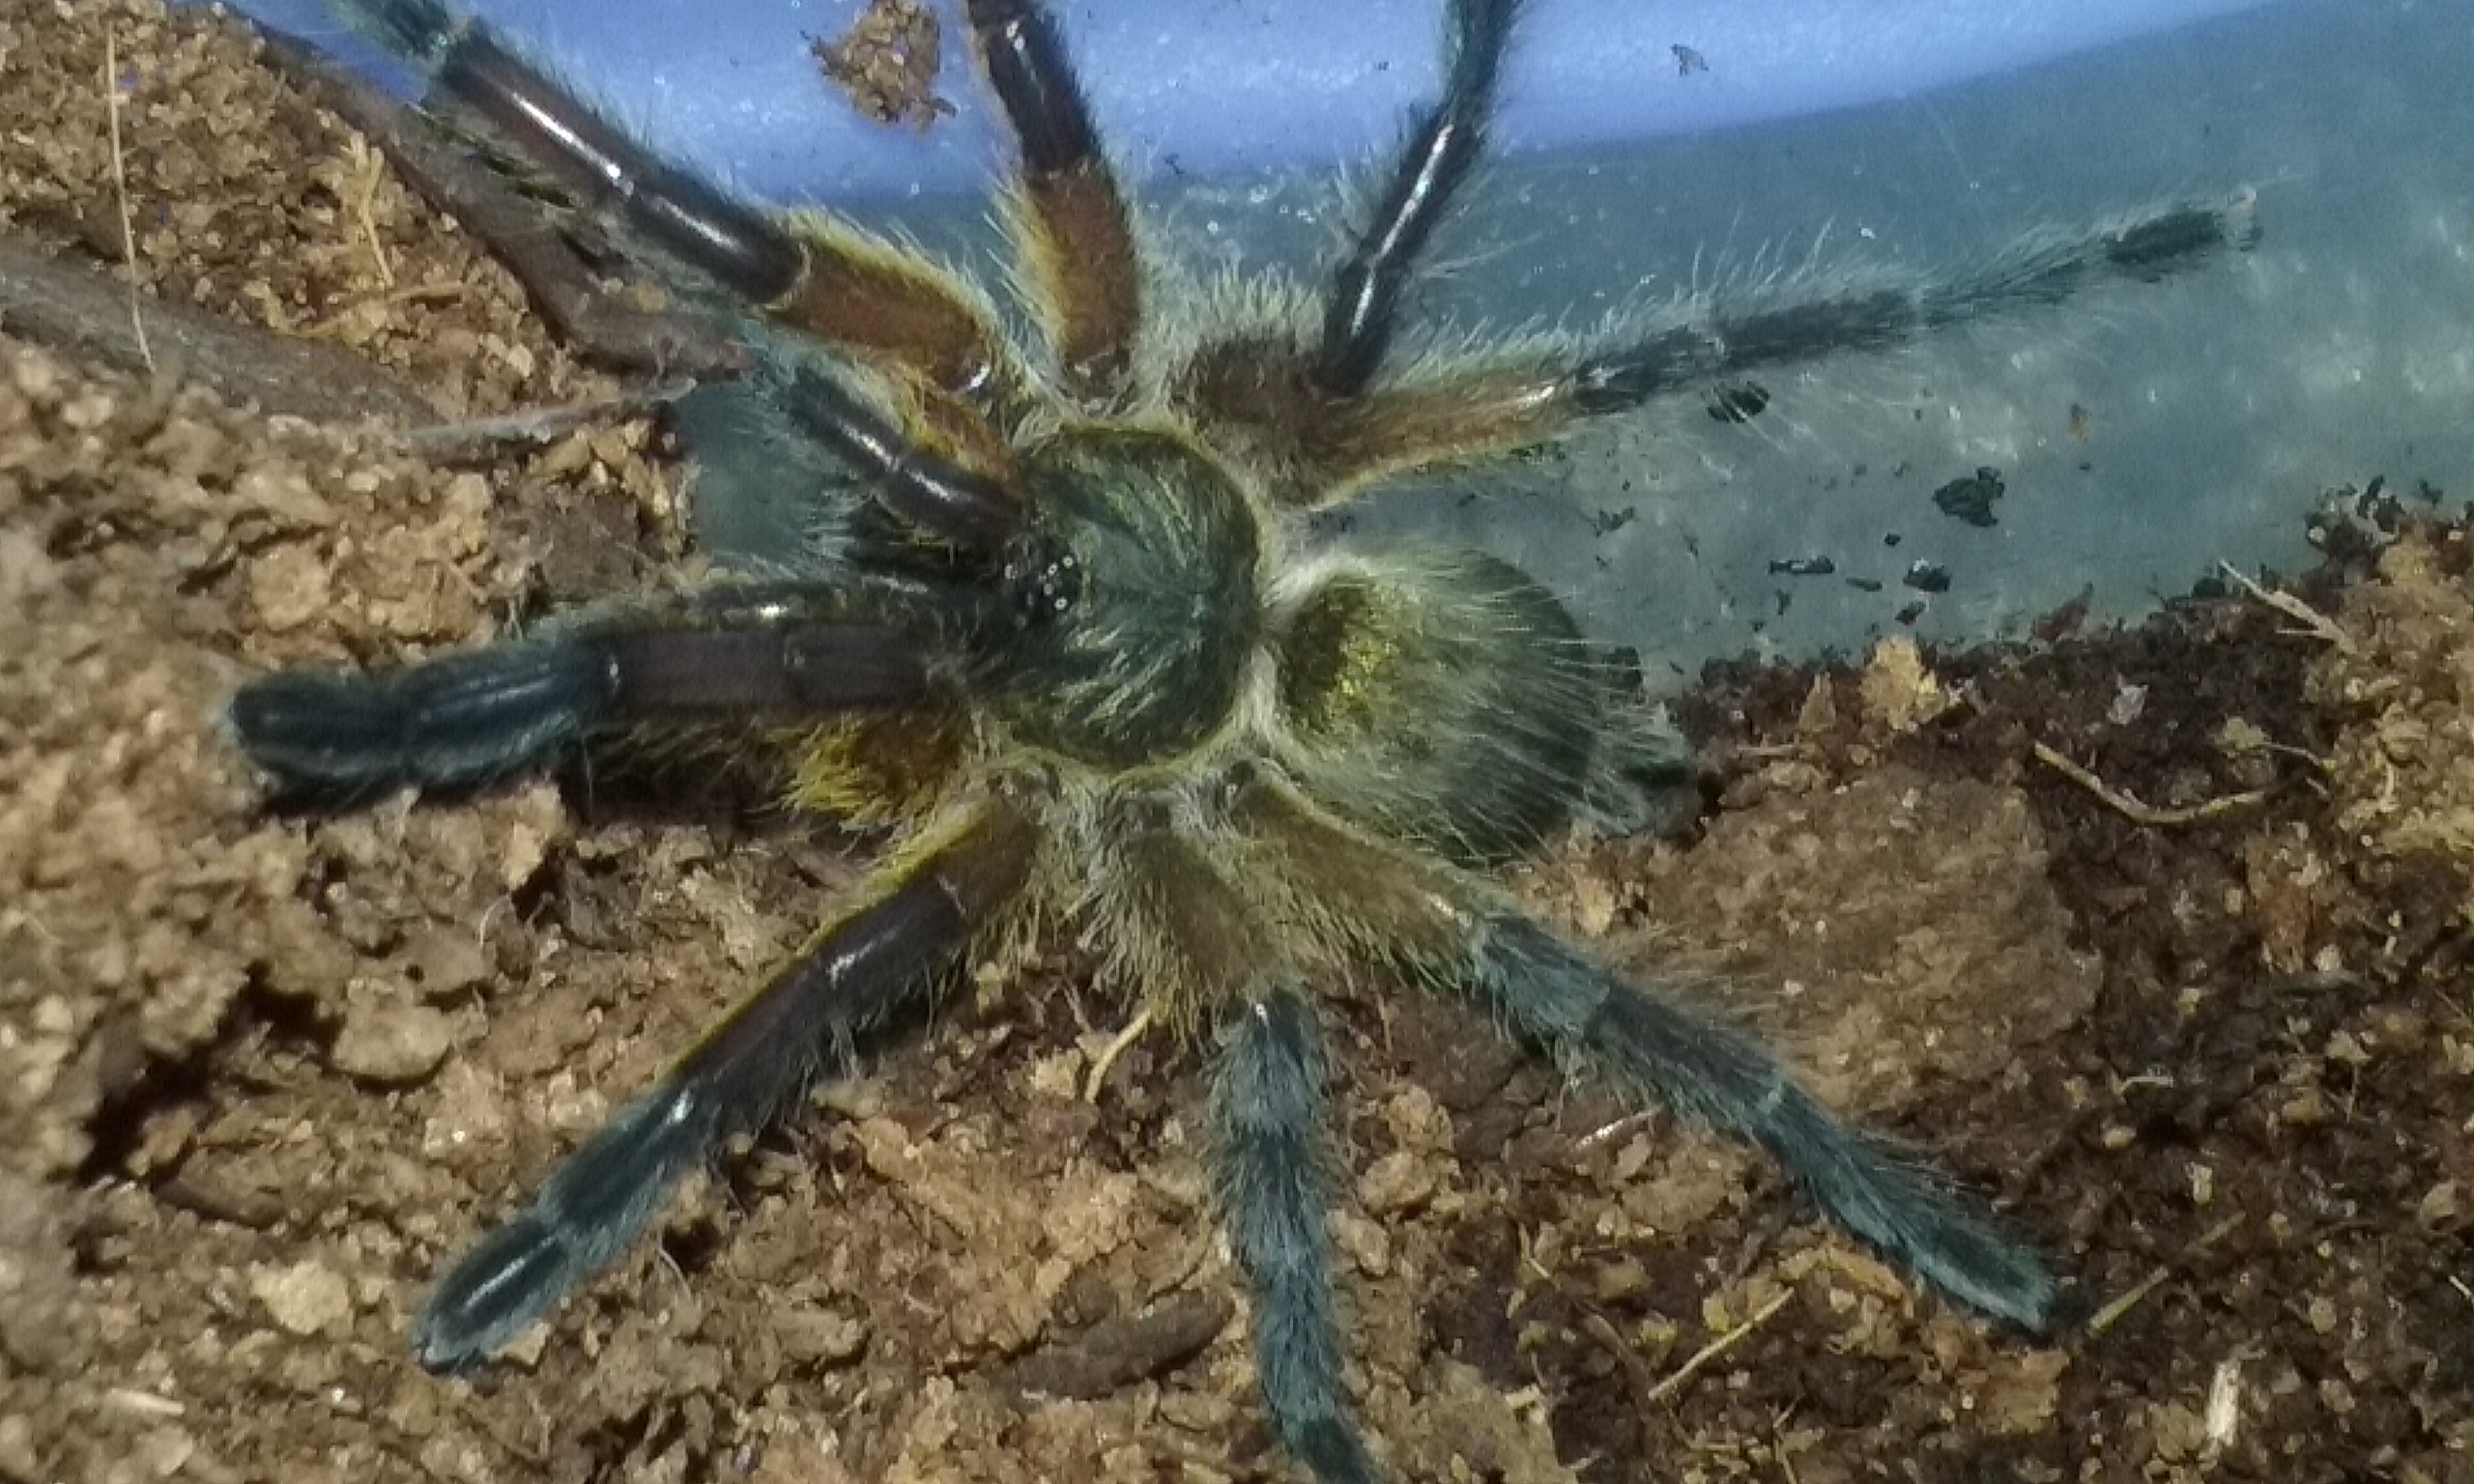 H. Pulchripes has just molted